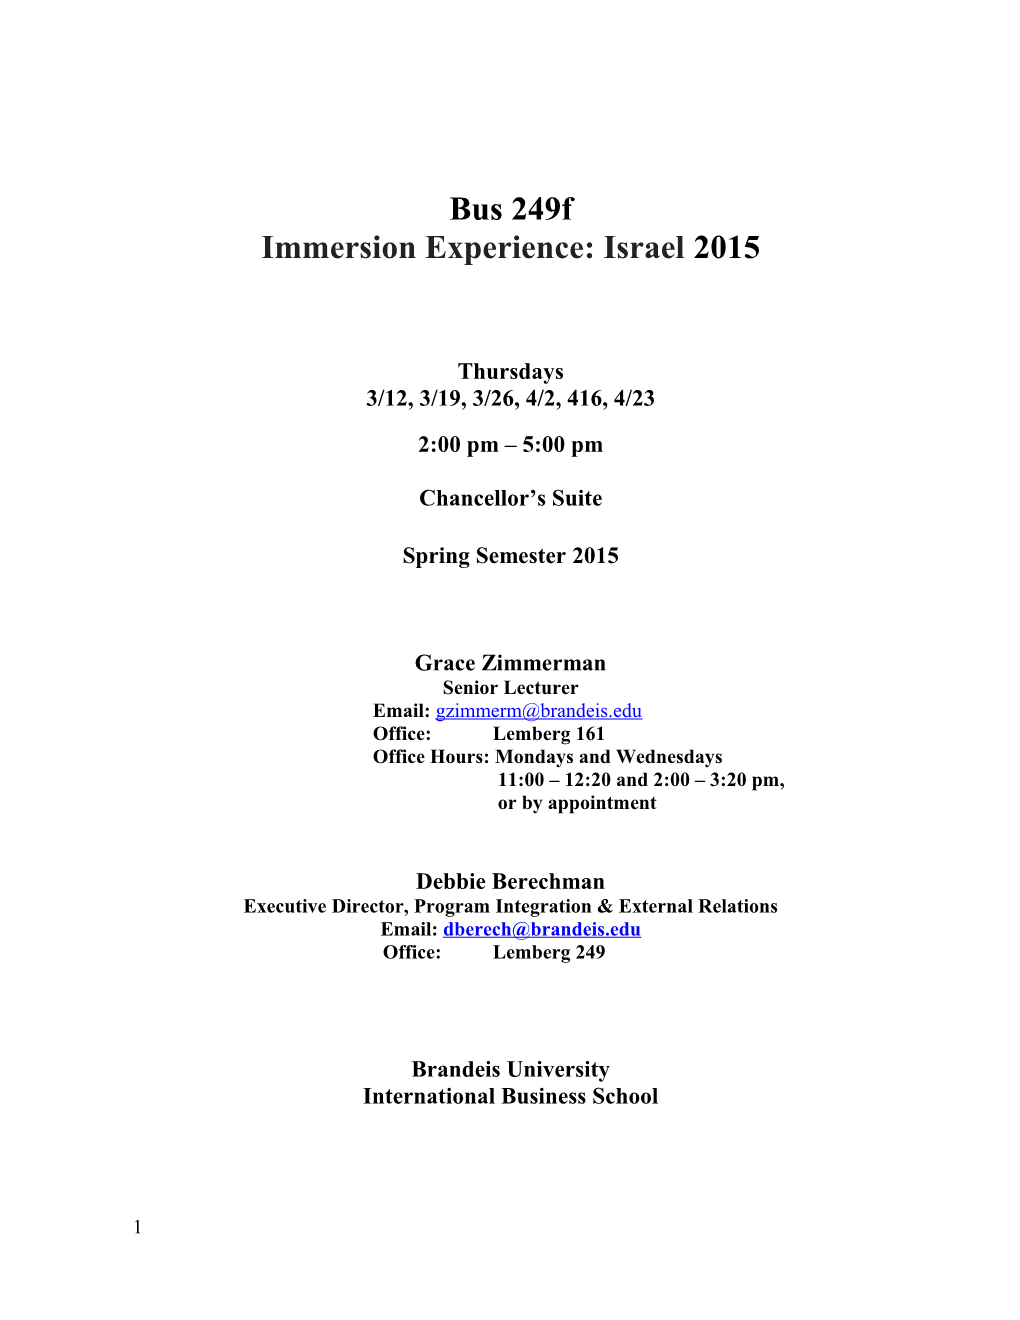 Immersion Experience: Israel2015